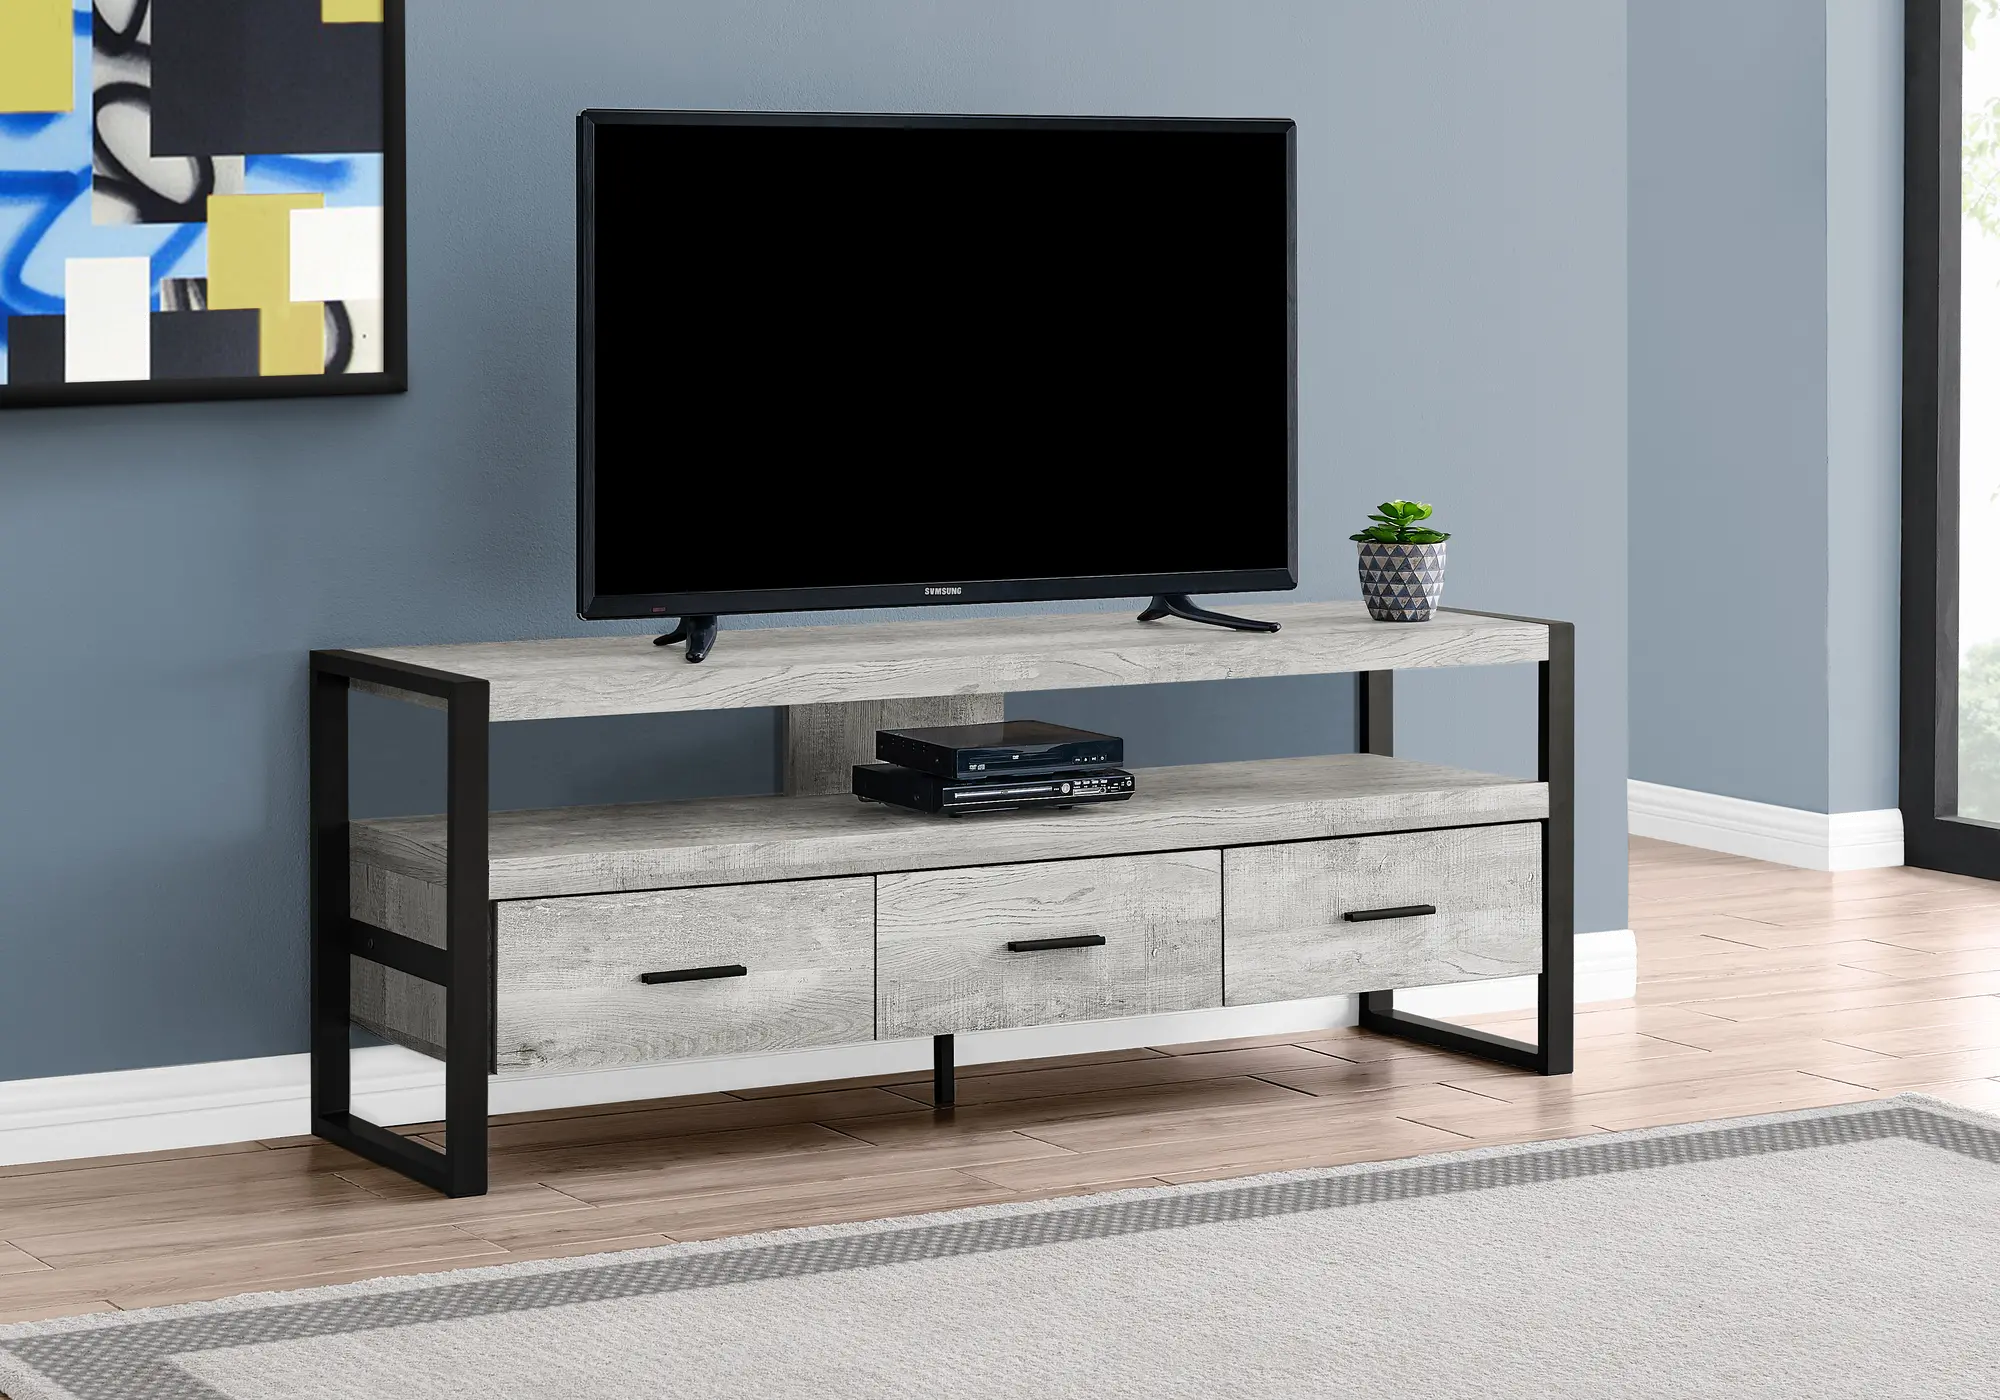 Photos - Mount/Stand Monarch Specialties Modern Industrial Gray 3 Drawer TV Stand I 2821 